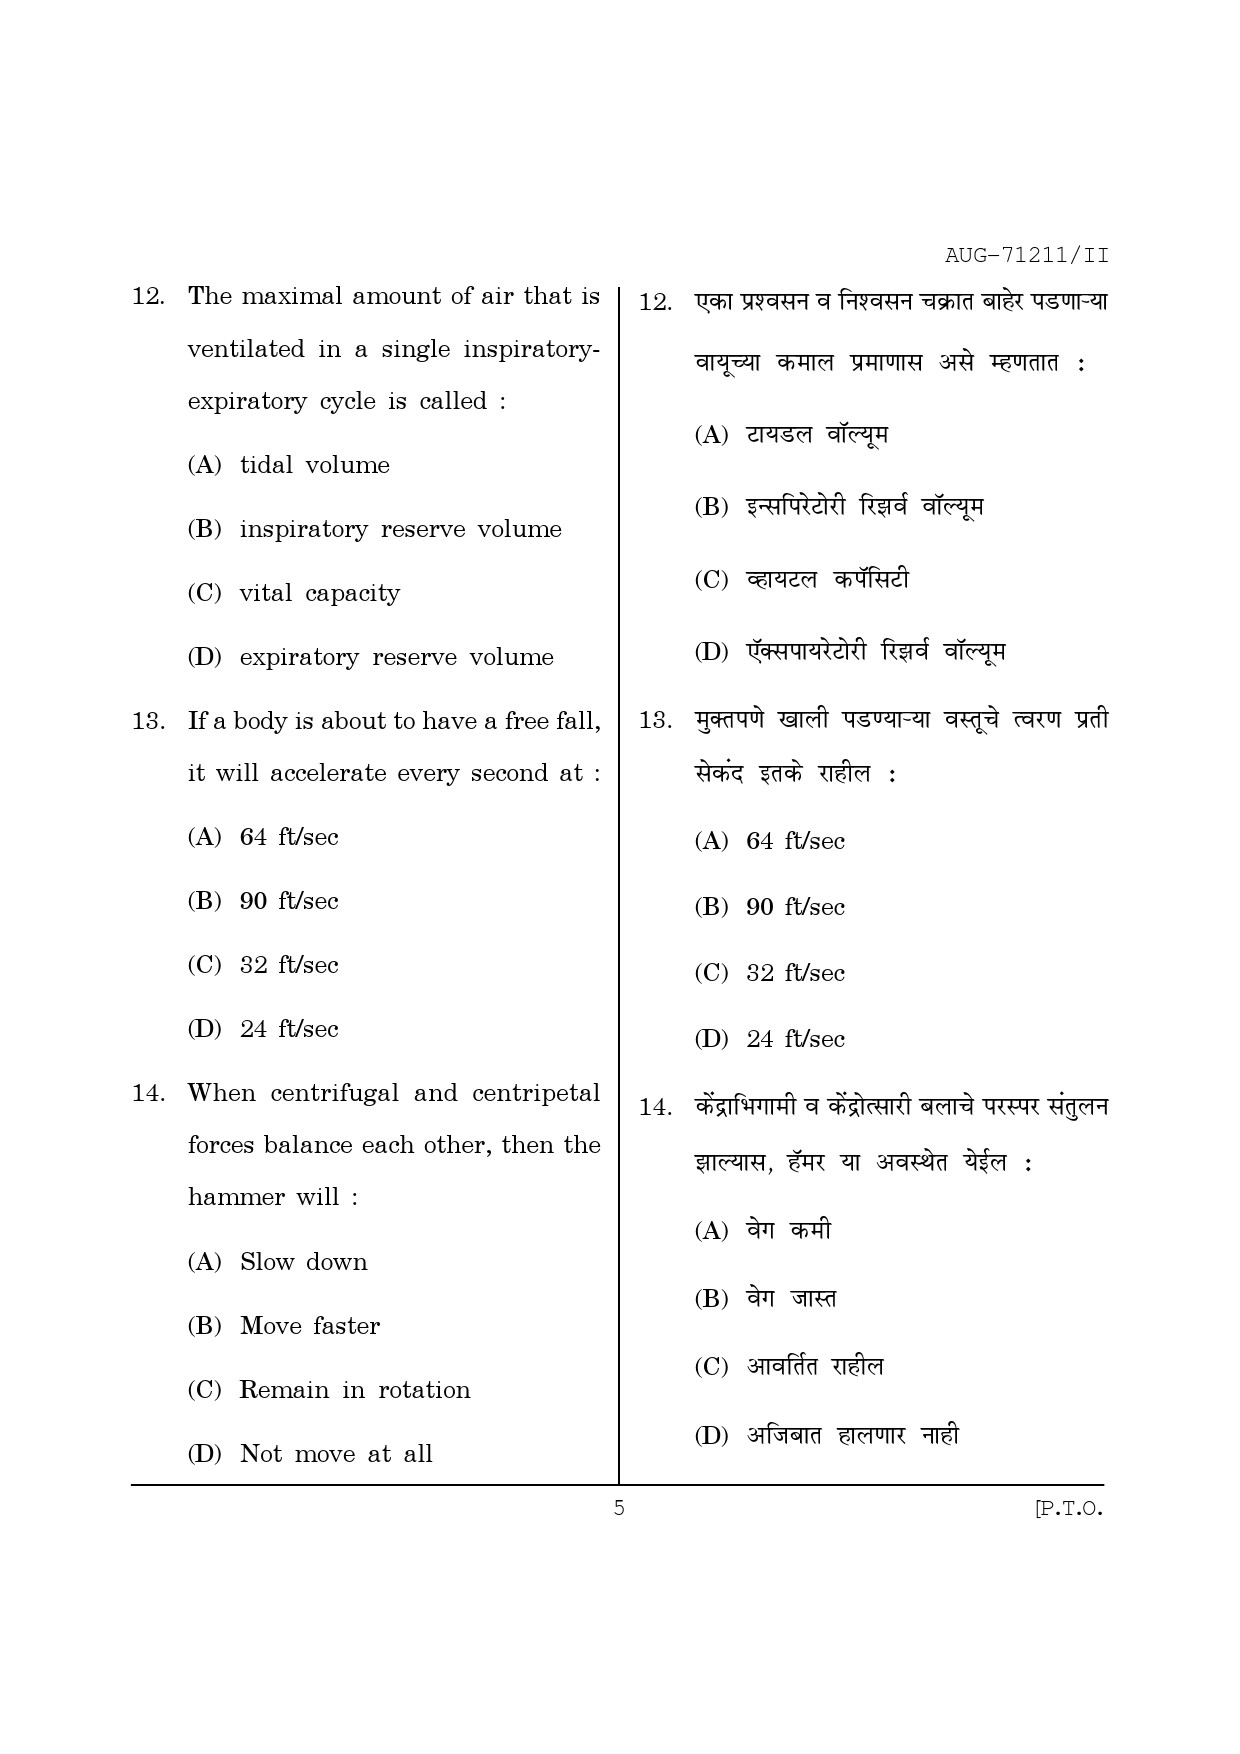 Maharashtra SET Physical Education Question Paper II August 2011 5